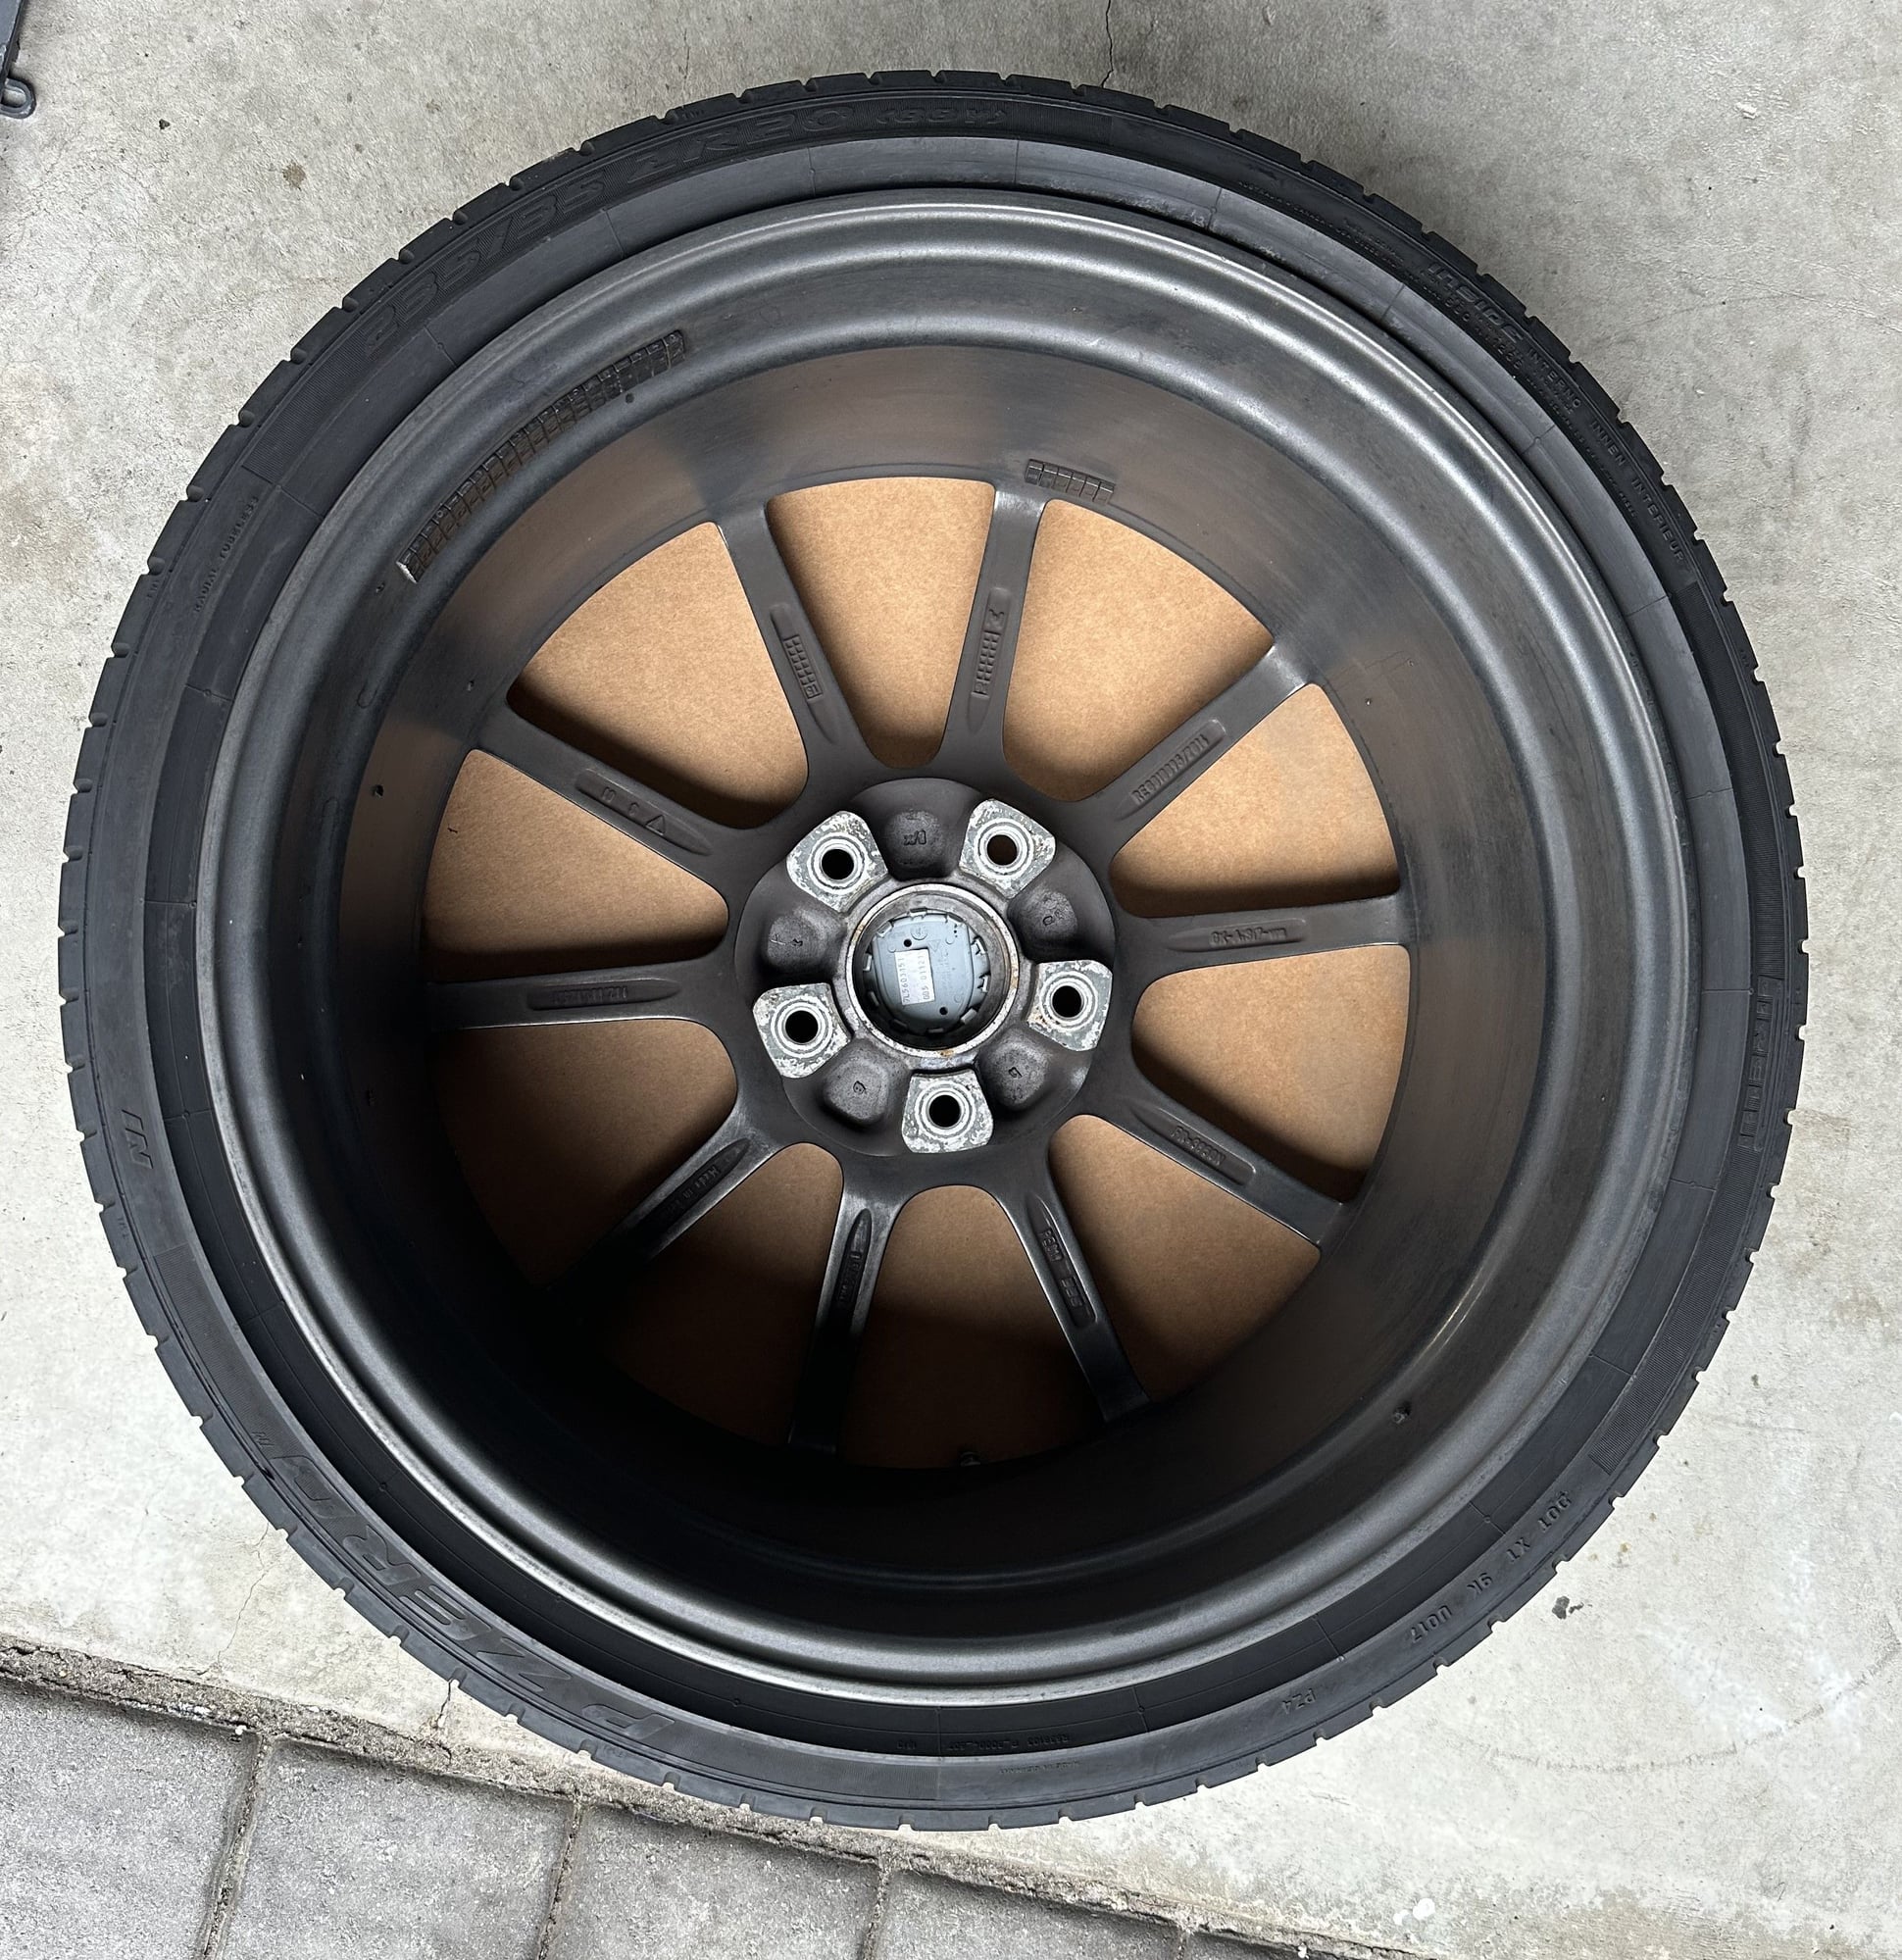 Wheels and Tires/Axles - For Sale:  20” Porsche Wheelset For 981 Boxster (and others). - Used - 2012 to 2016 Porsche Boxster - Fort Lee, NJ 07024, United States